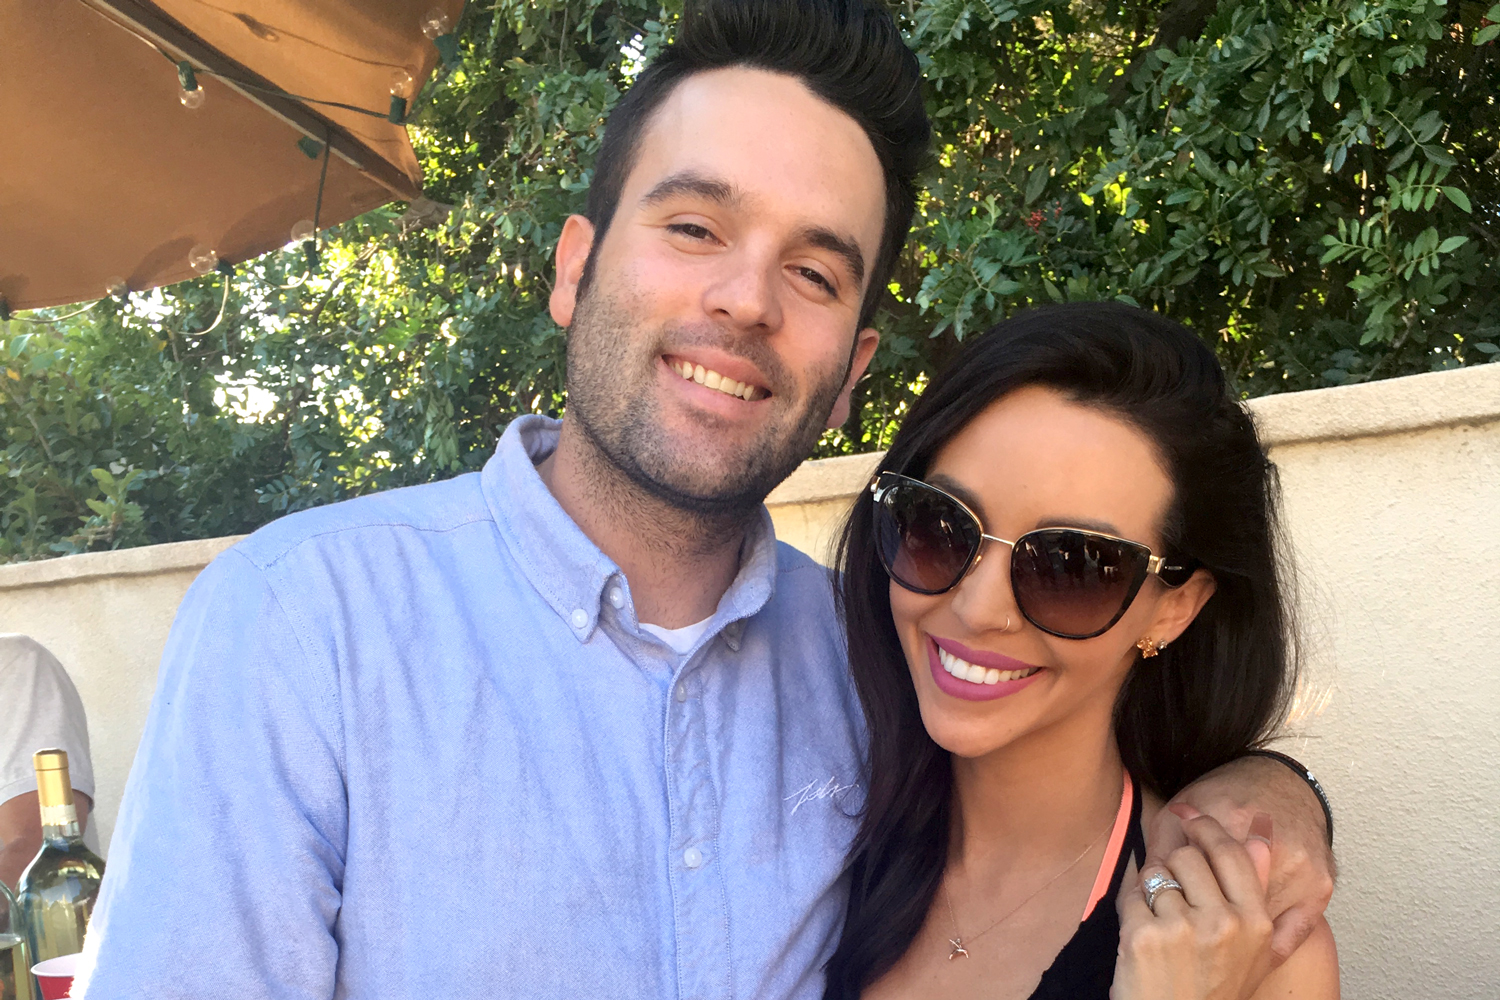 What was Scheana Shay's relationship with Michael Shay